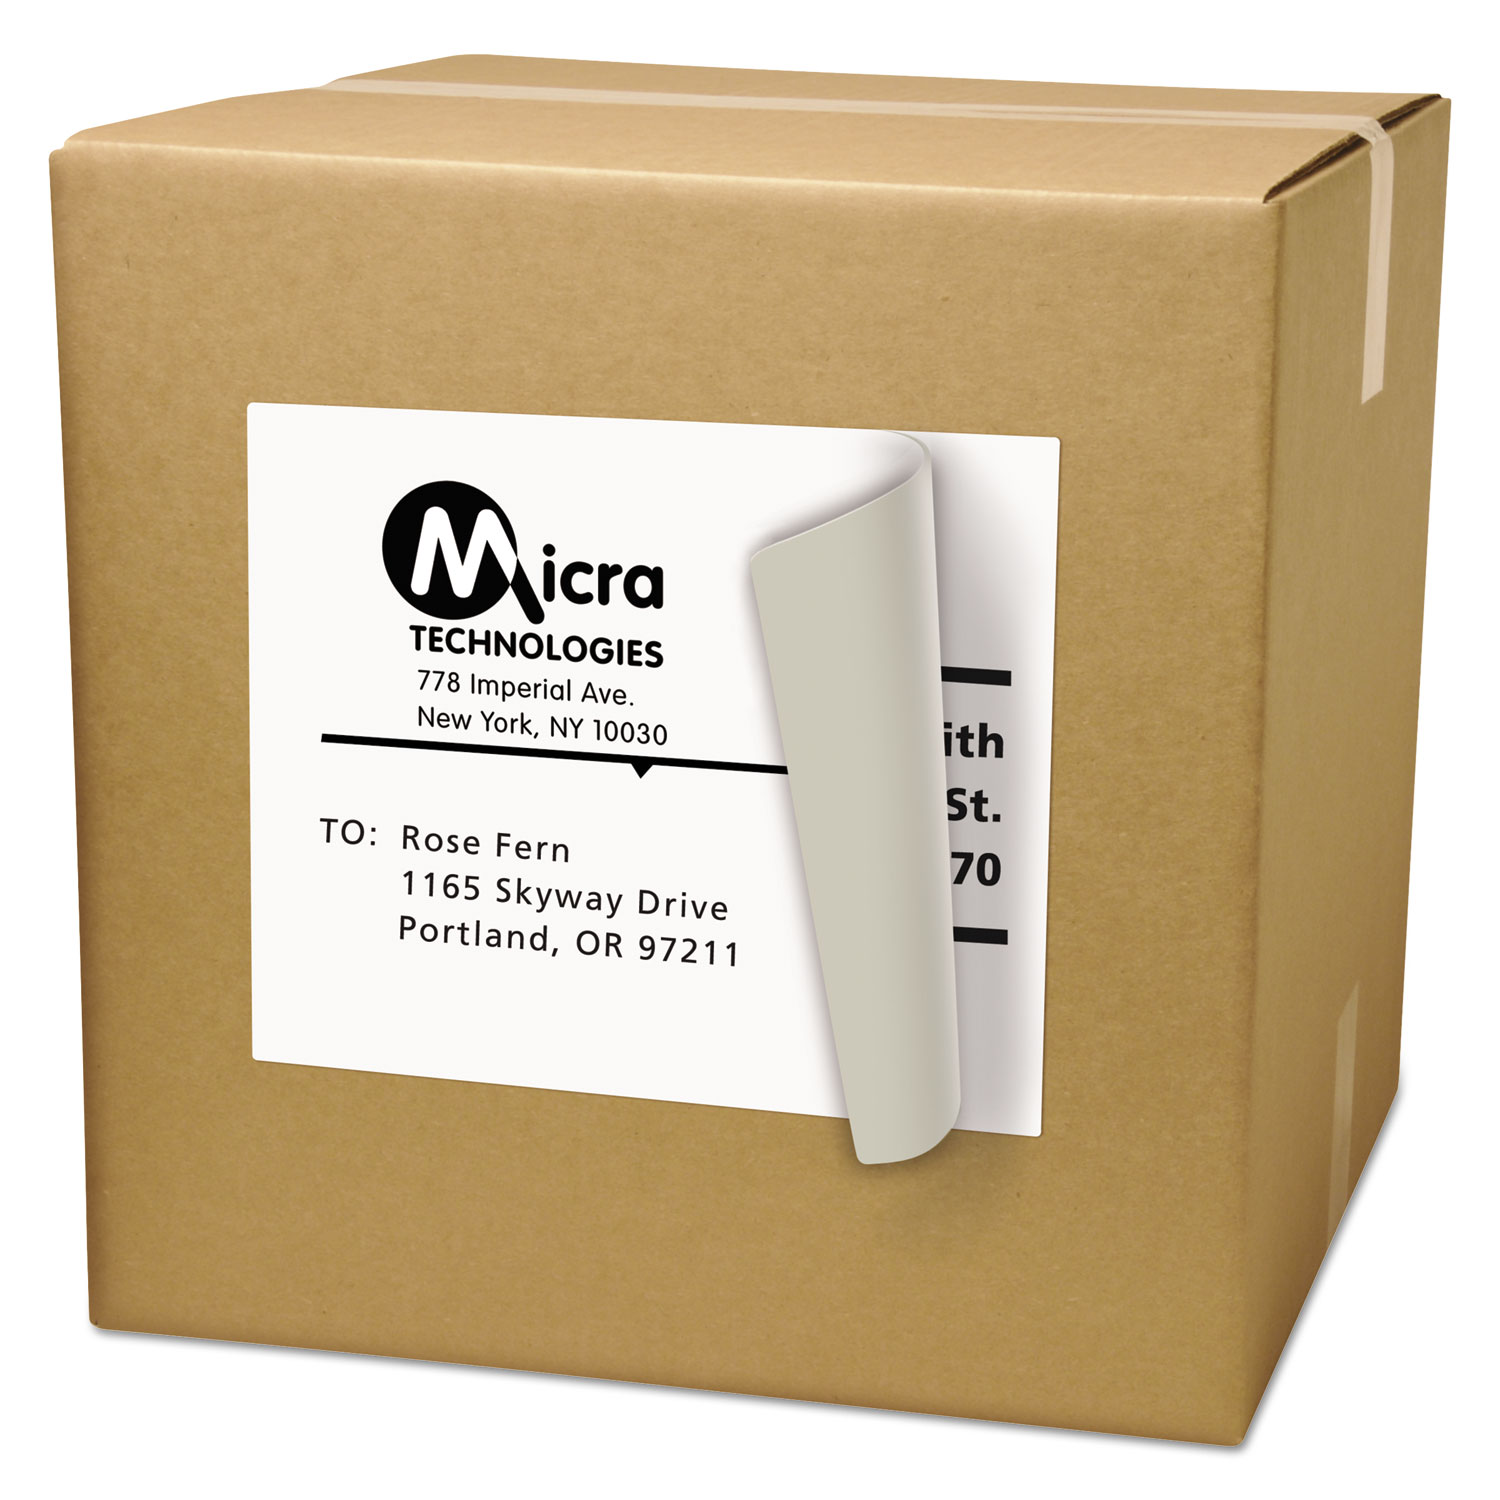  Avery 05165 Shipping Labels with TrueBlock Technology, Laser Printers, 8.5 x 11, White, 100/Box (AVE5165) 